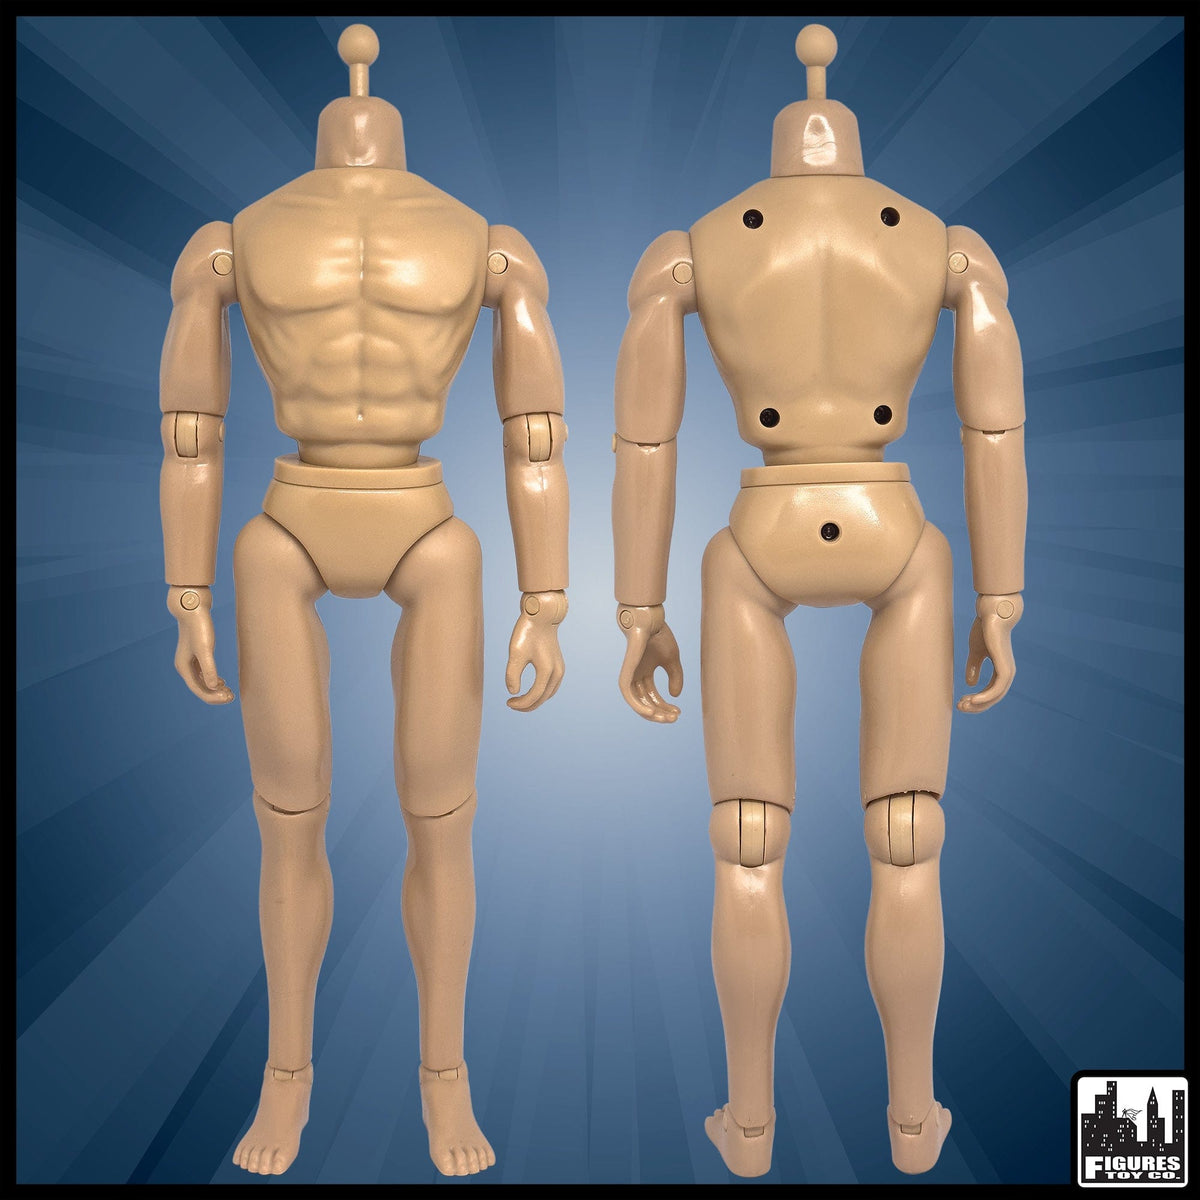 12 Inch Type S Male Action Figure Body